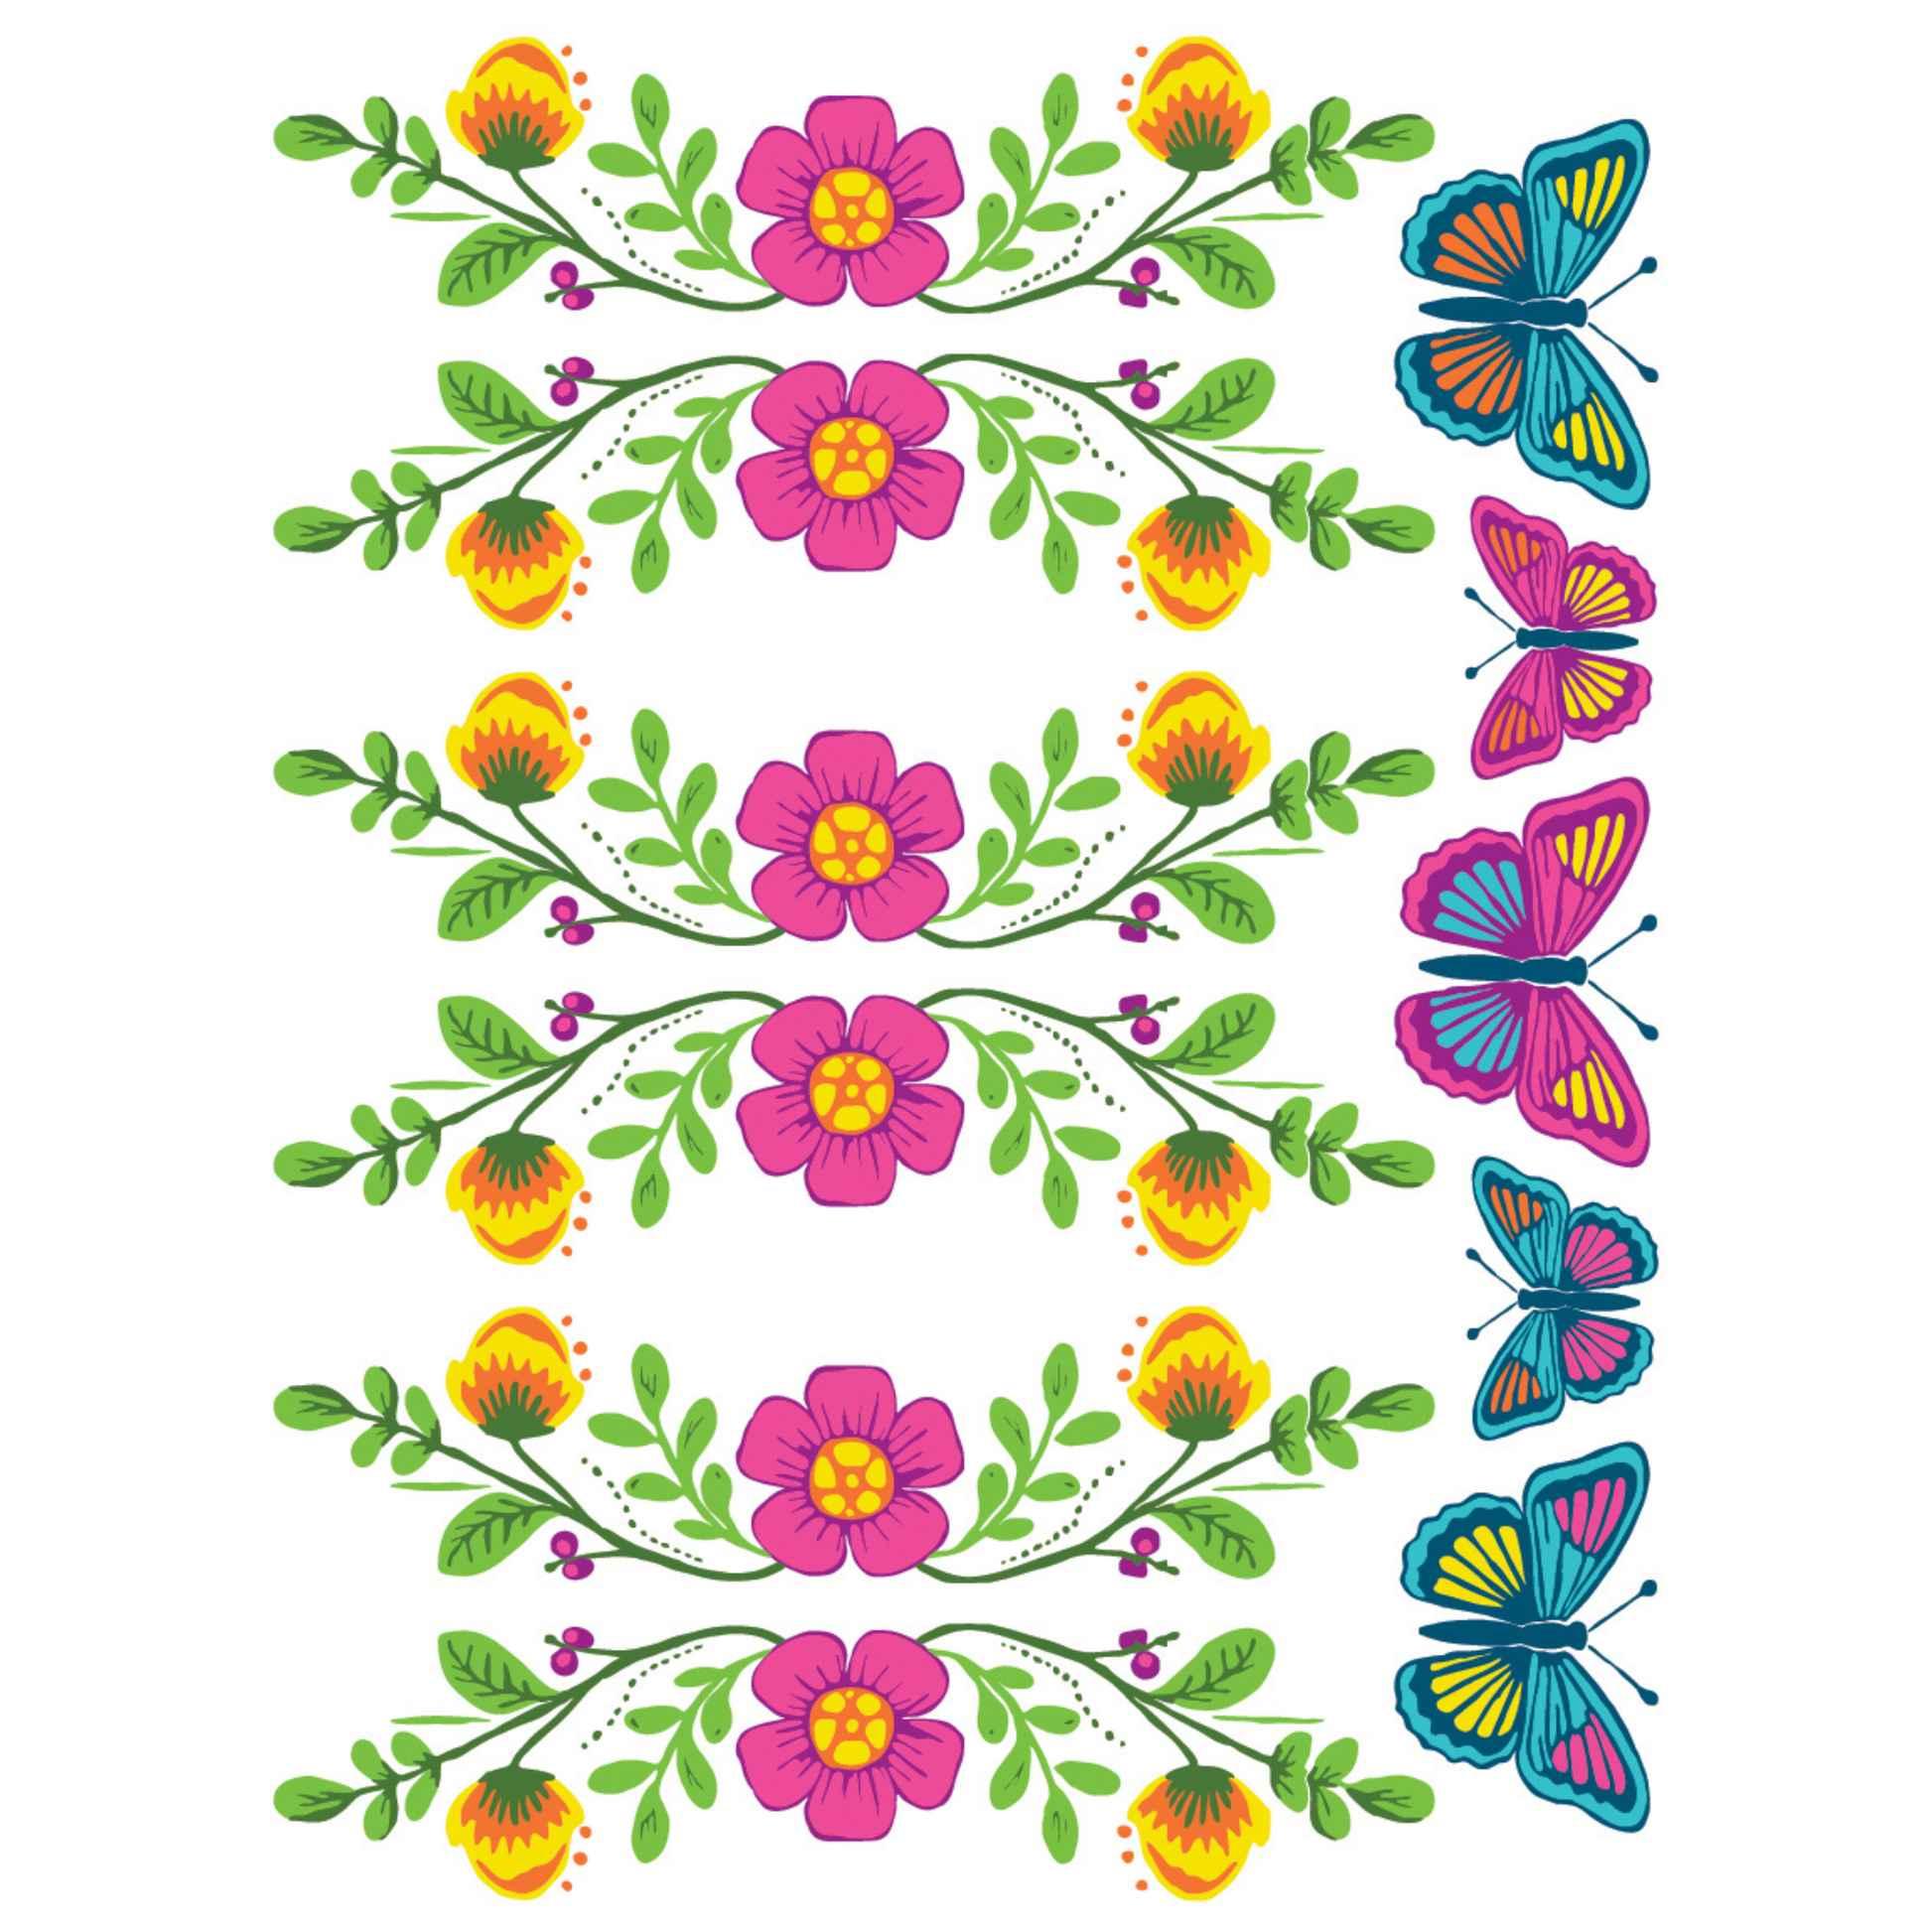 "Vida Flora" IOD Paint Inlay designed by Debi Beard from DIY Paint. Available at Milton's Daughter. Page 7 of 8.